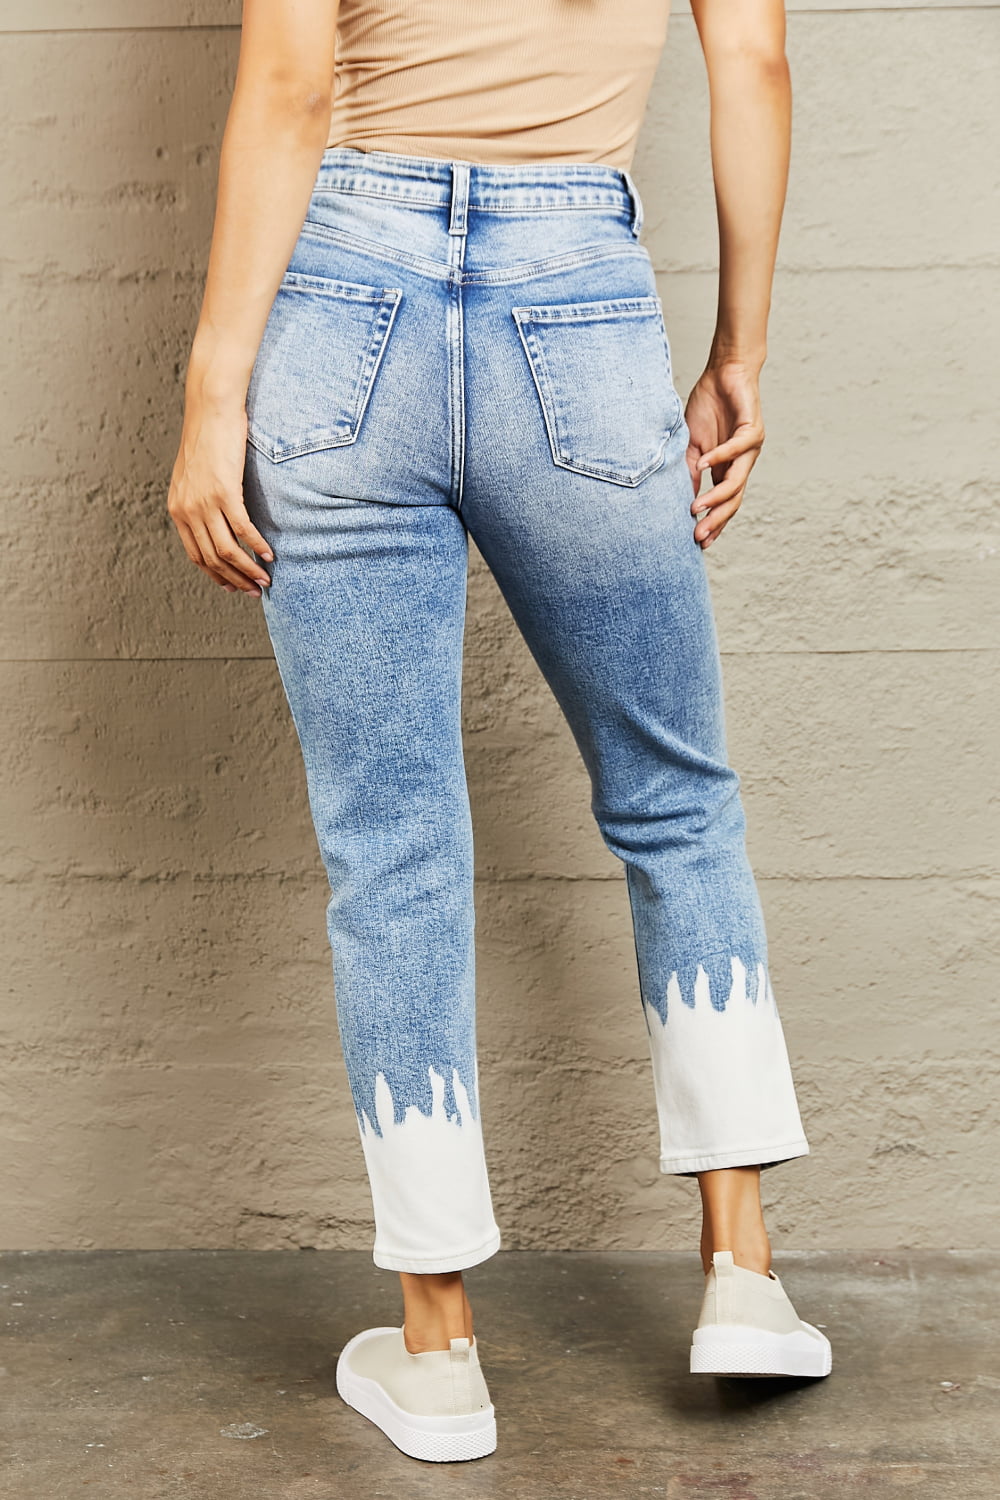 BAYEAS High Waisted Distressed Painted Cropped Skinny Jeans - Tigbul's Fashion